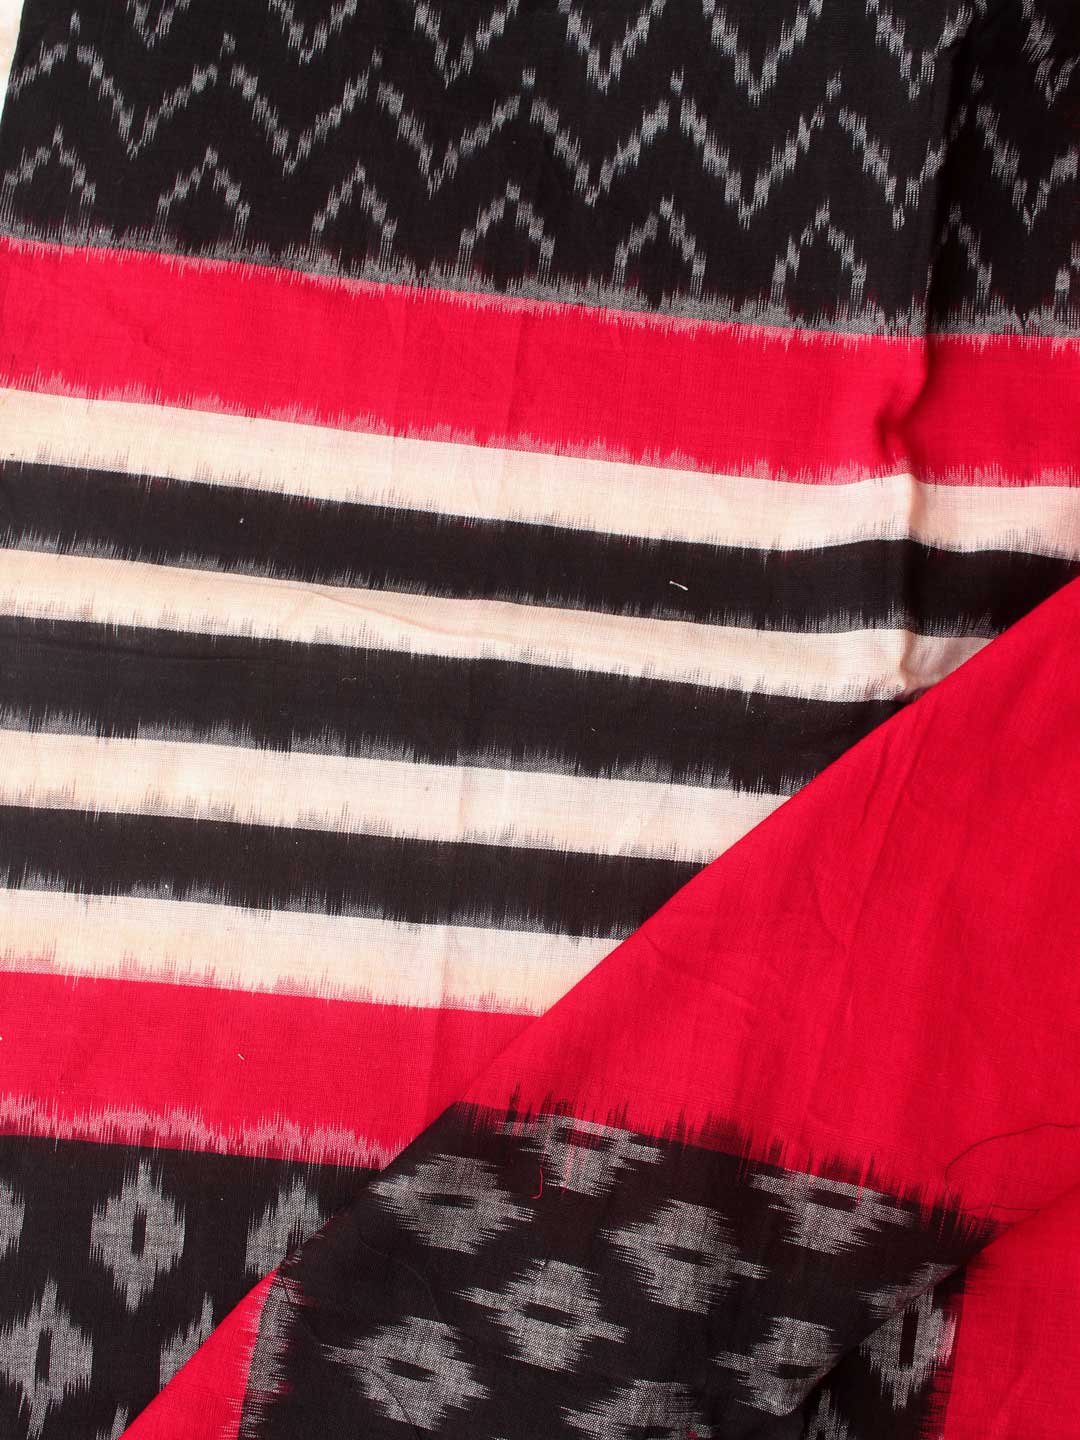 Red, black and white cotton ikat Dupatta - Shilphaat.com